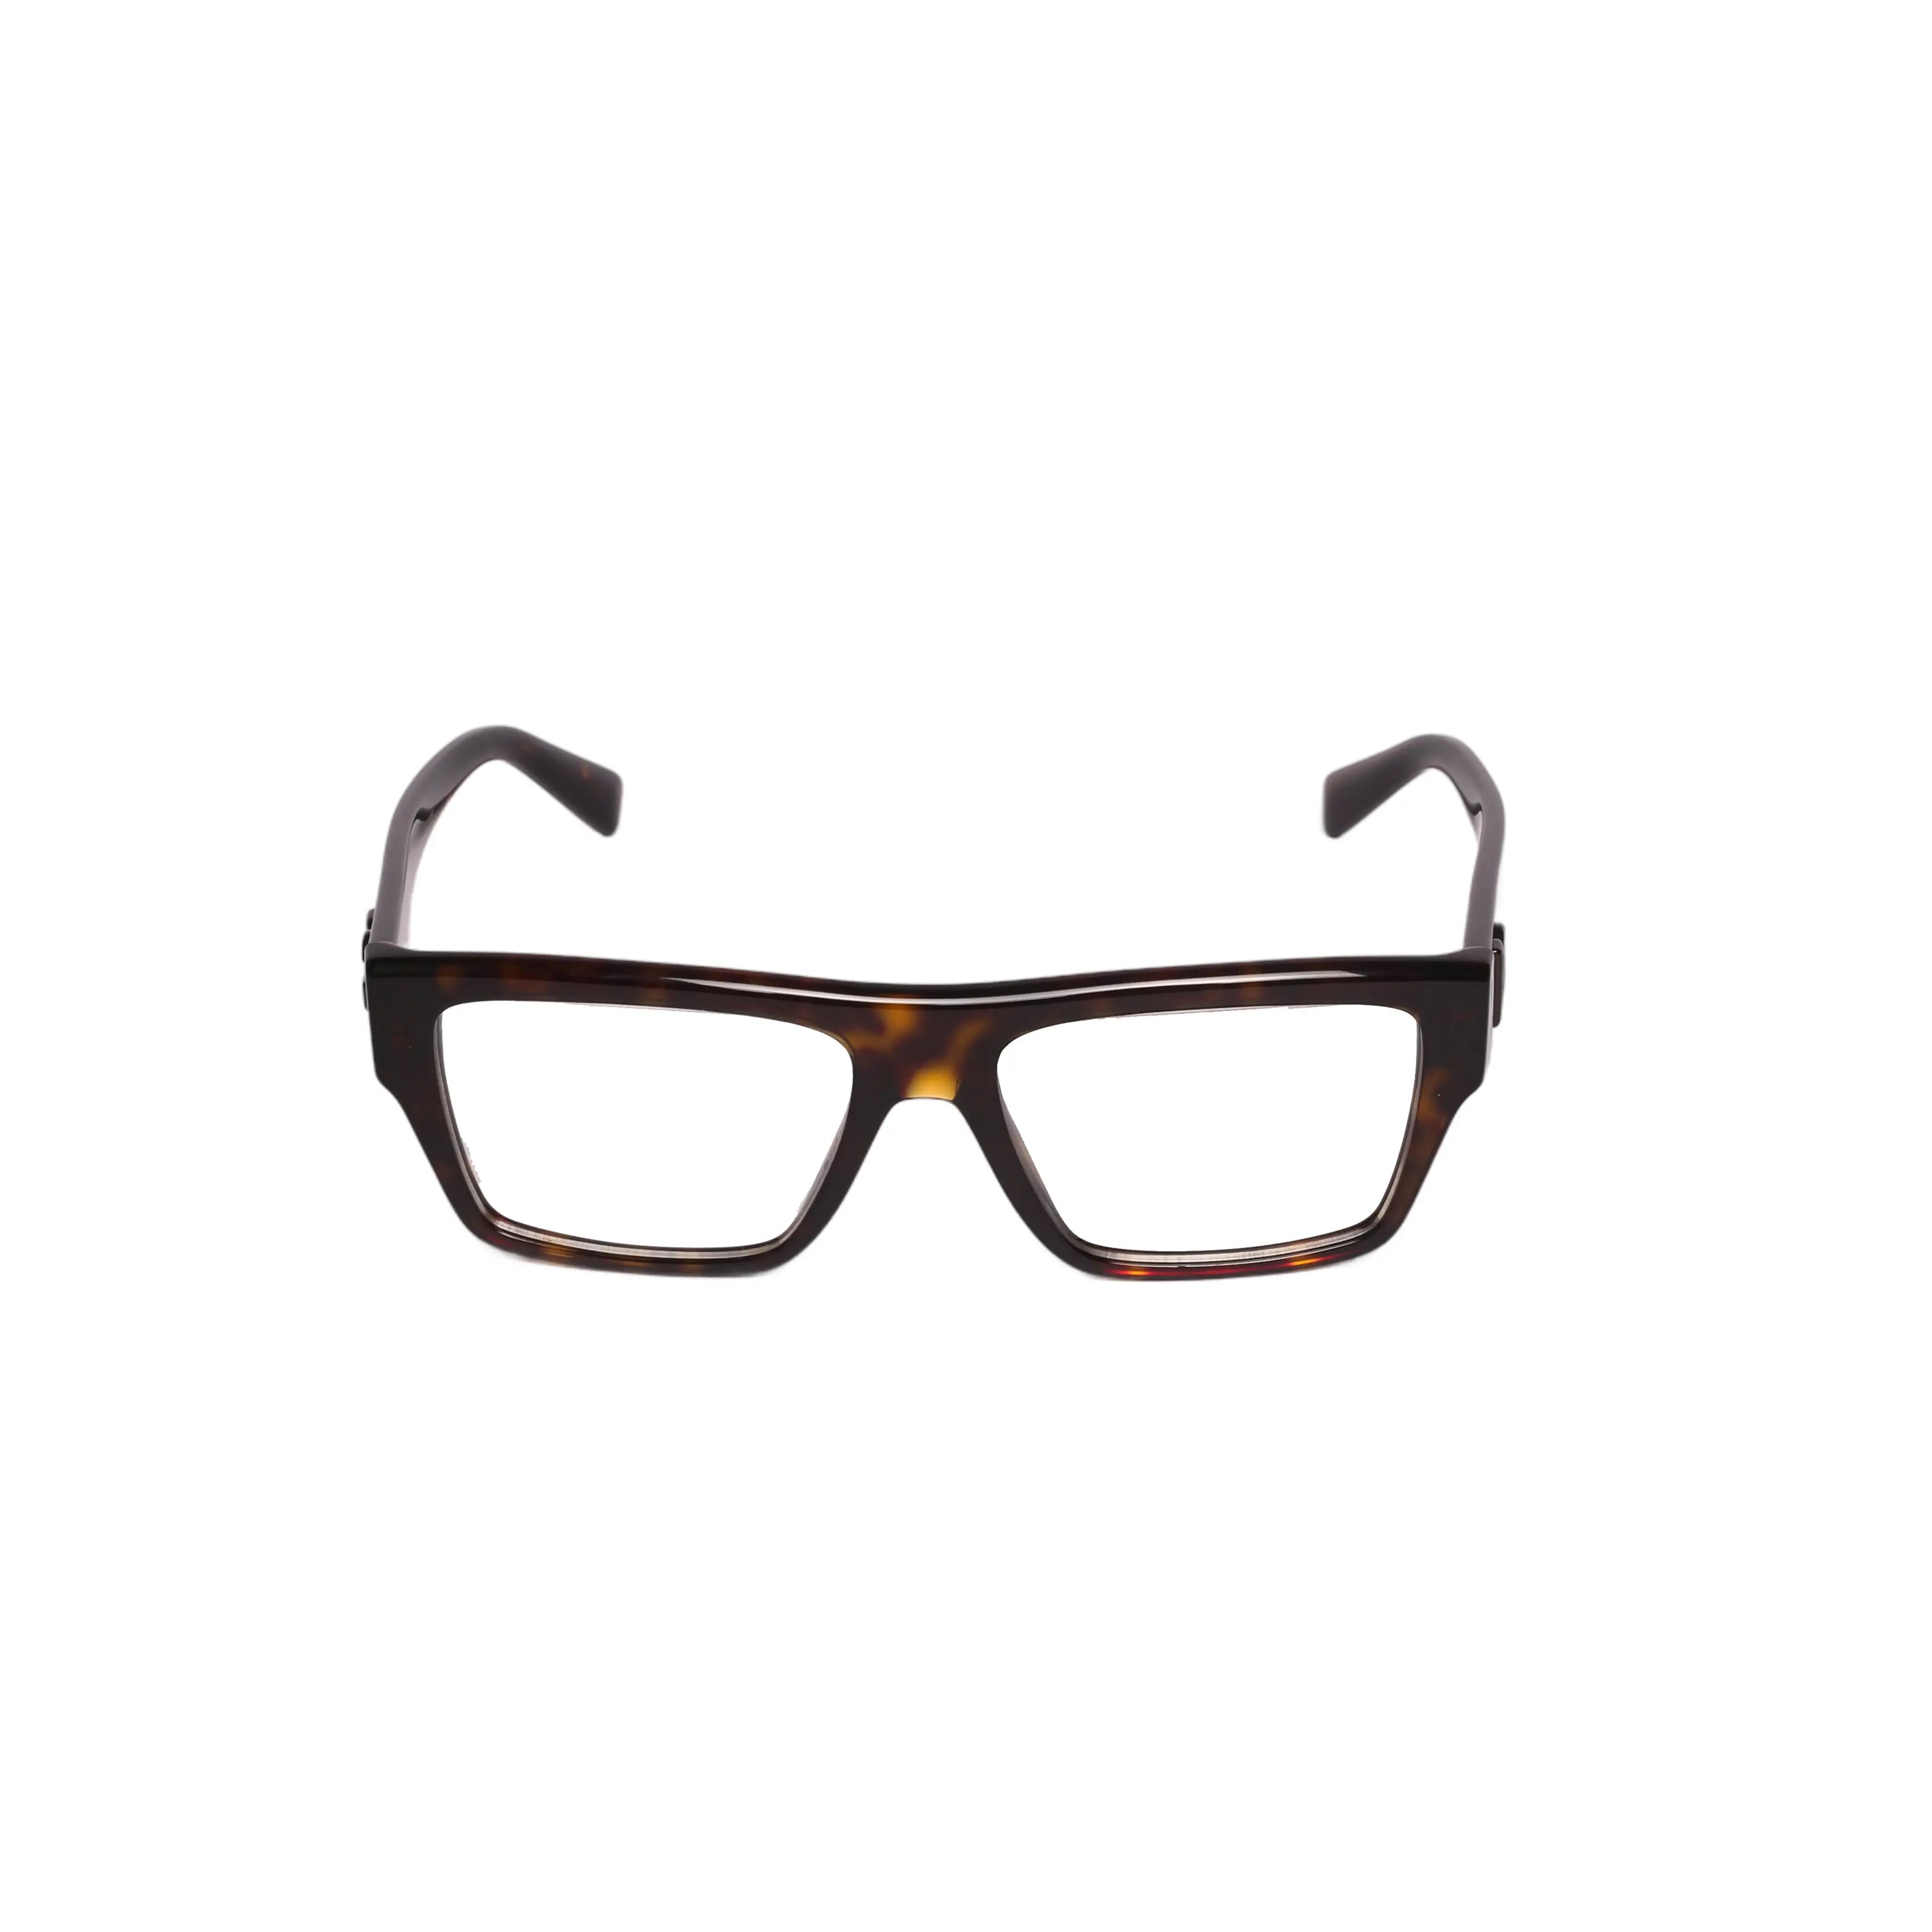 Dolce & Gabbana (D&G) DG 3382-53-502 EyeglassesLook stylish in Dolce &amp; Gabbana (D&amp;G) DG 3382-53-502 Eyeglasses! These glasses make a statement with chic metal frames and fashion-forward detailing. High-quEyeglasses